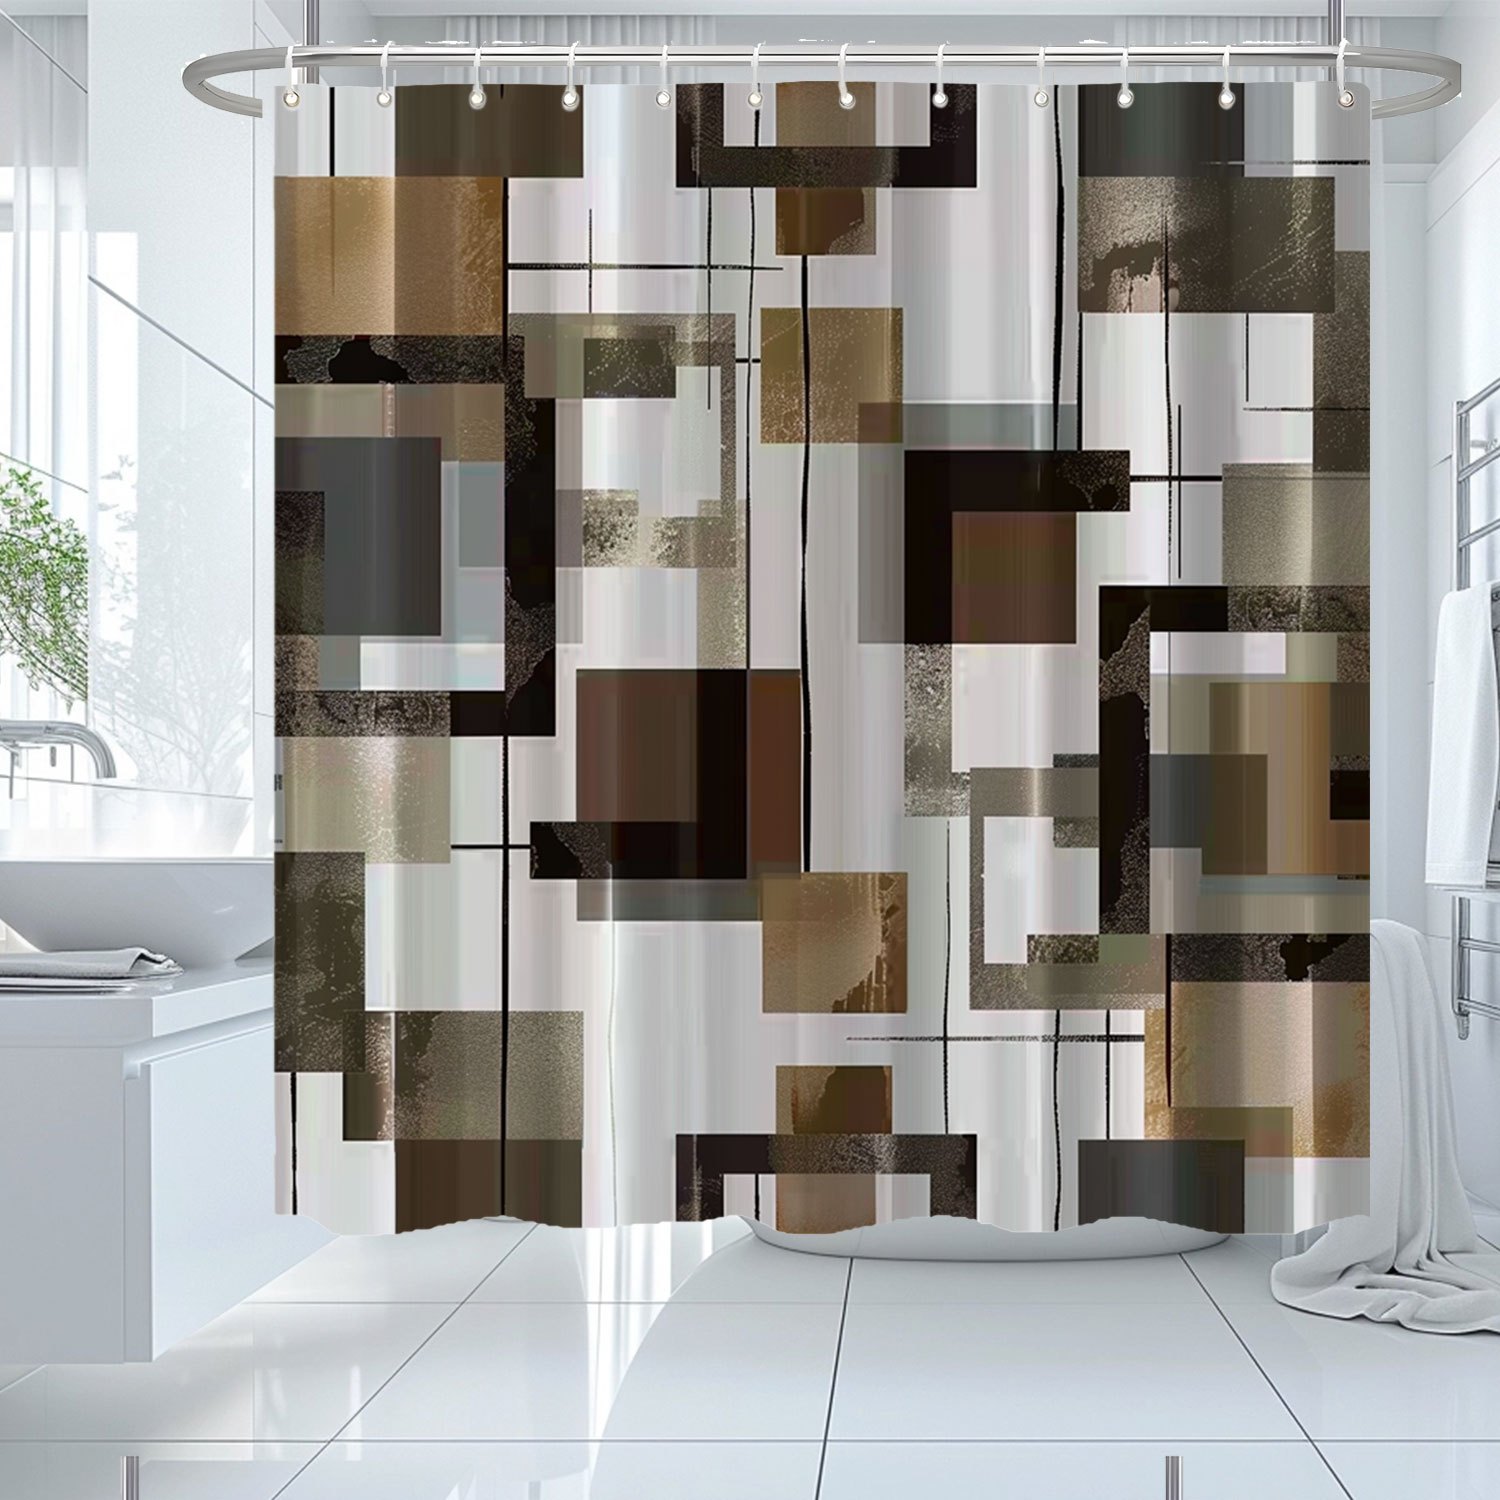 

decorative Charm" Brown Striped Artistic Shower Curtain With 12 Hooks - Waterproof Polyester, Perfect For Bathroom Decor & Accessories, 71x71 Inches